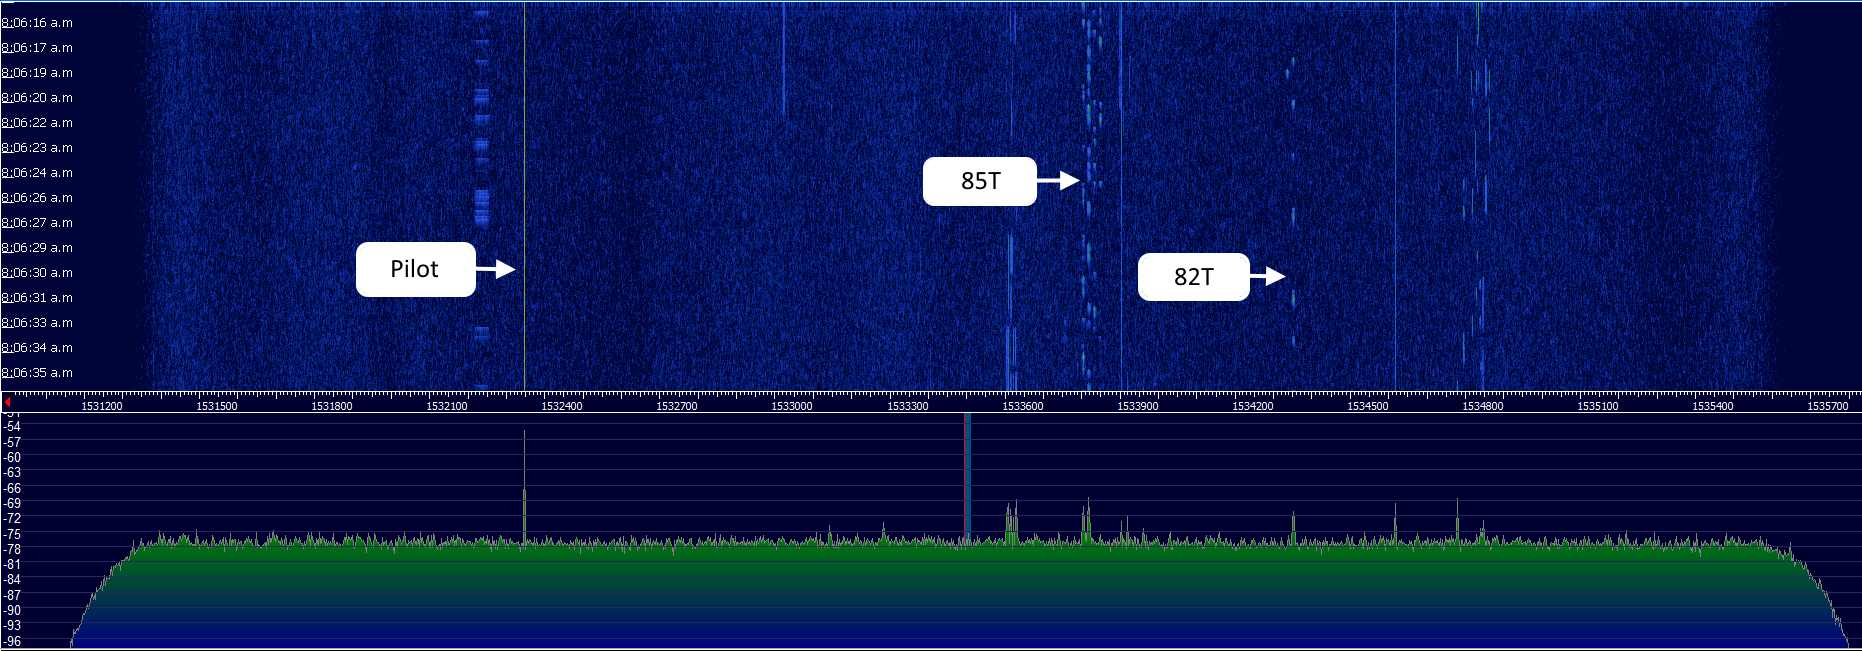 Wide spectrum view of the I3 POR satellite on the C-band ( local oscillator = 5150 MHz )